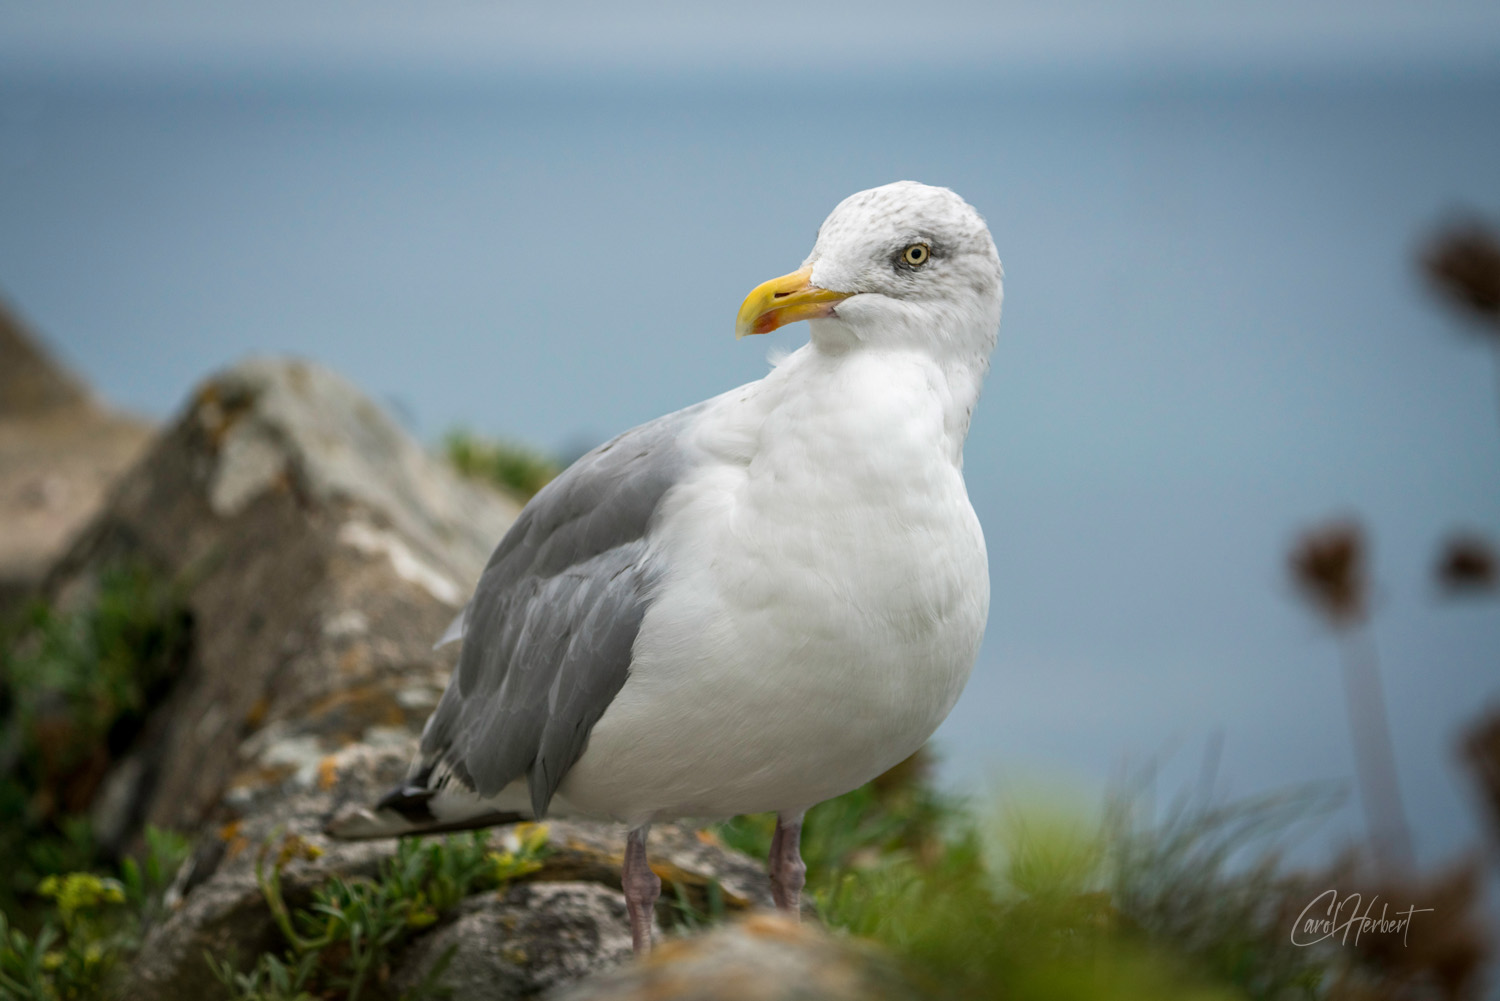 A seagull on a rock looking into the camera